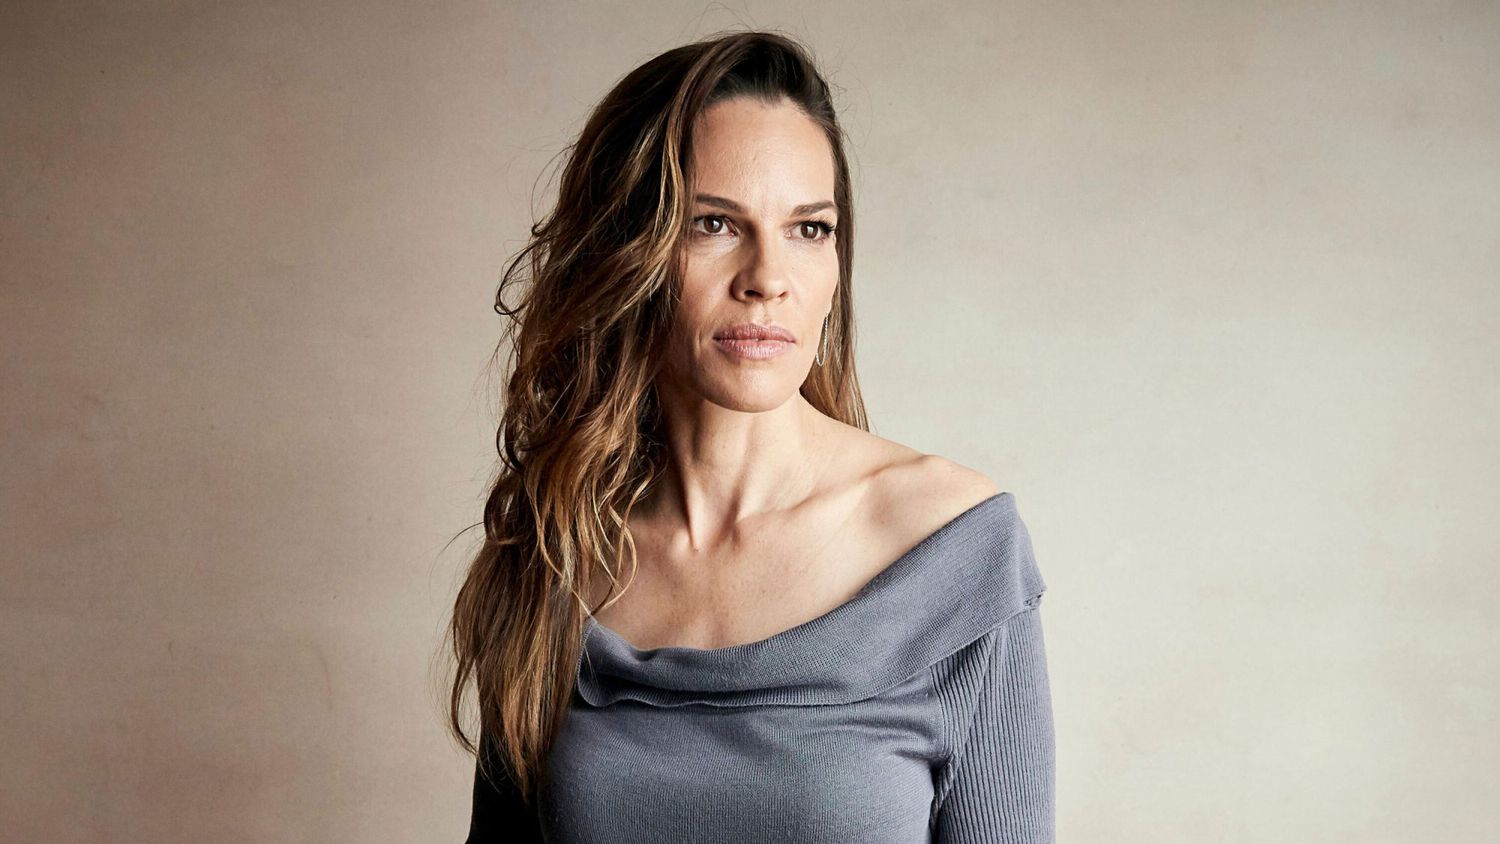 dj shields recommends hilary swank see thru pic